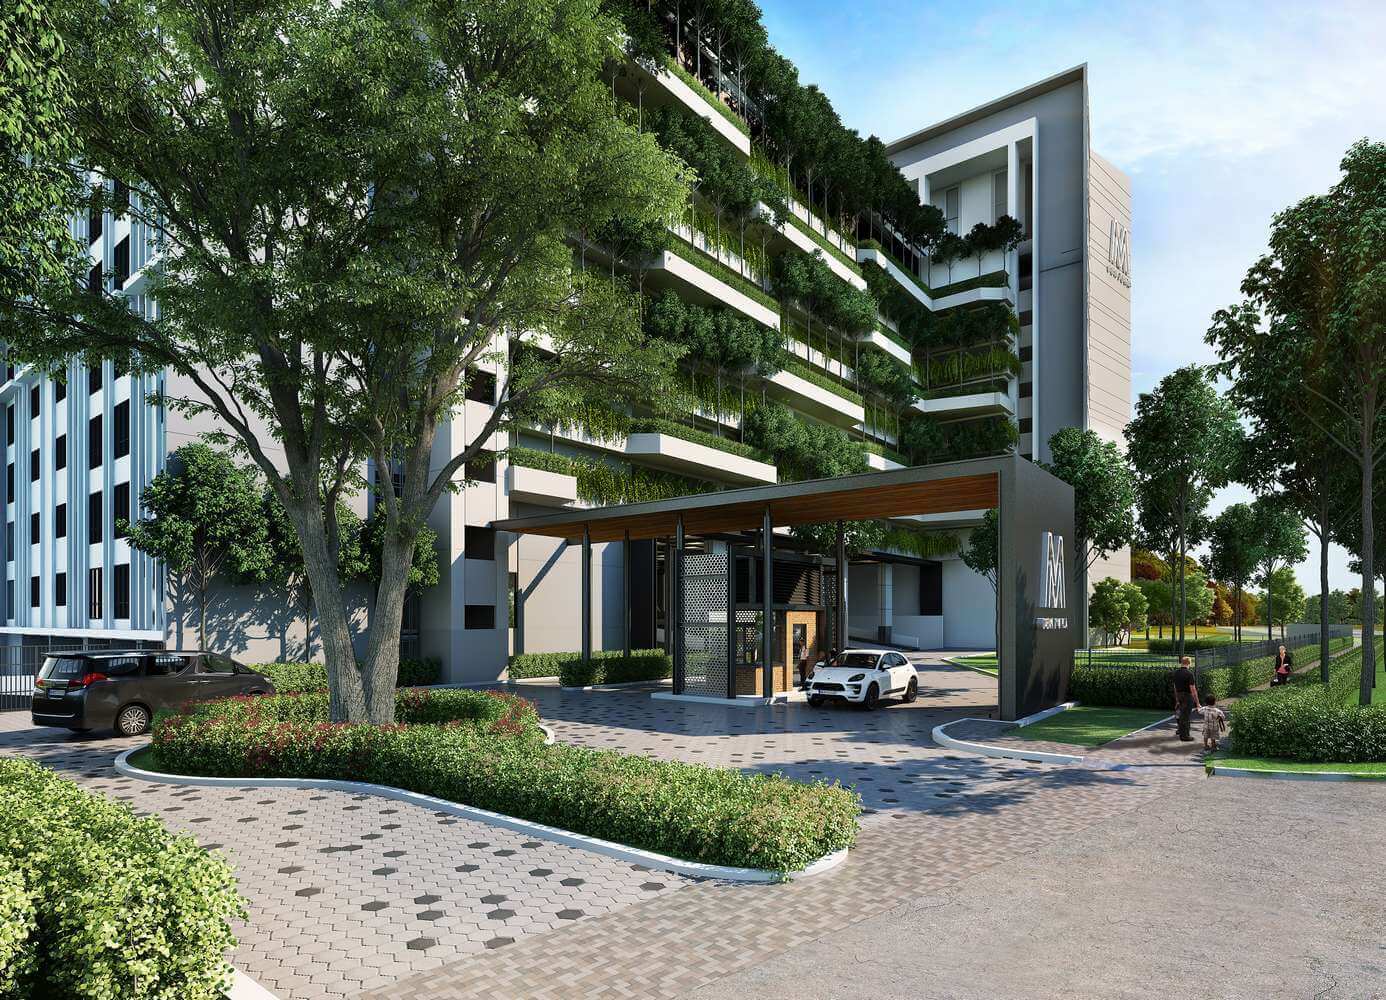 M Centura at Sentul KL City: Affordable Freehold Residence With Eco-friendly Features